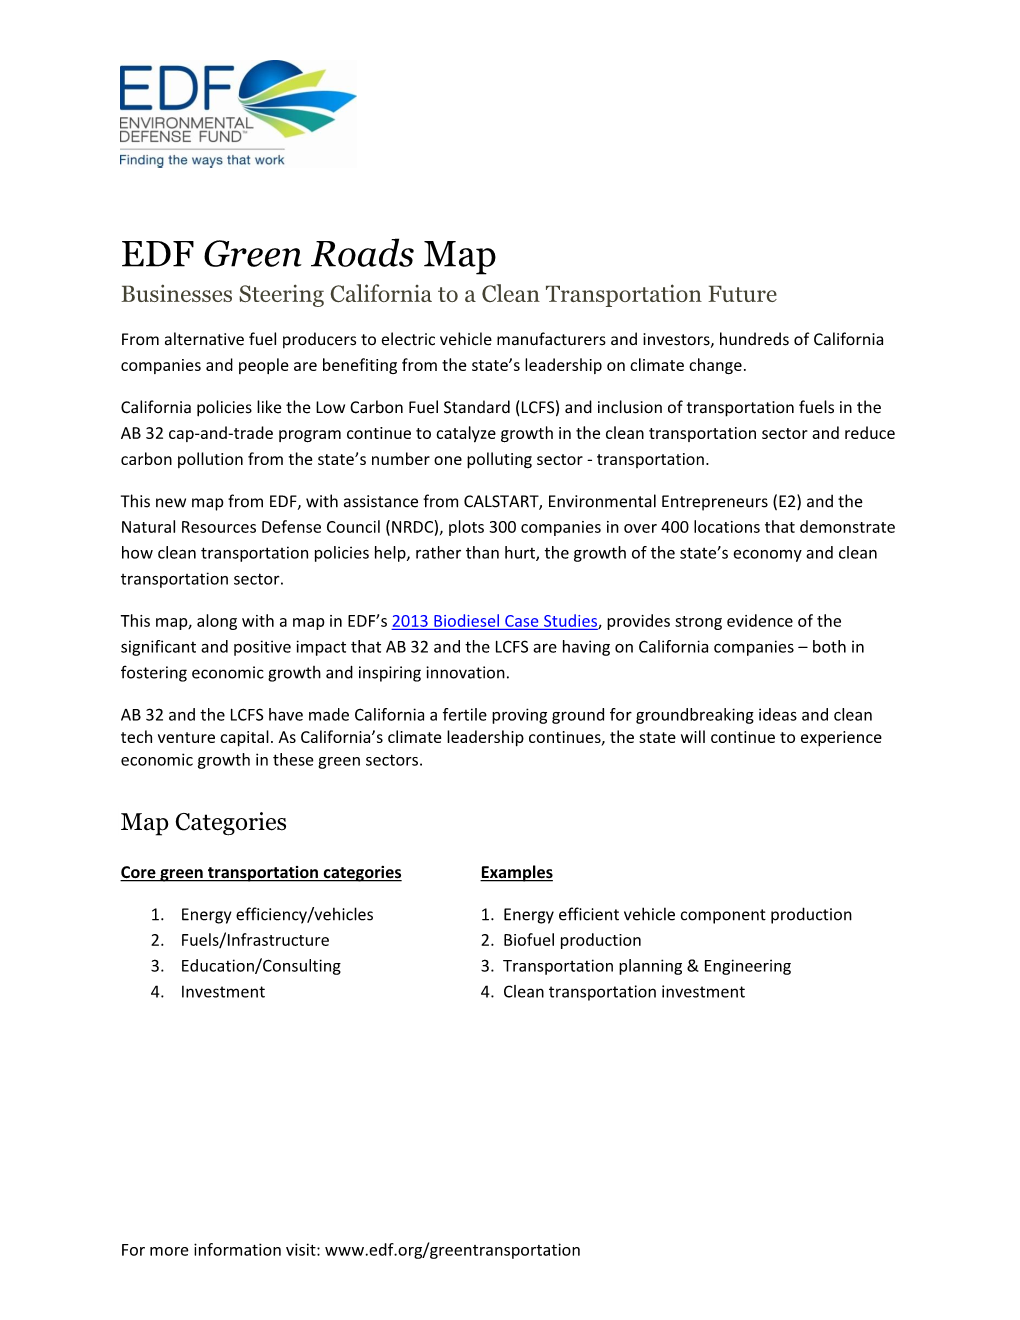 EDF Green Roads Map Businesses Steering California to a Clean Transportation Future